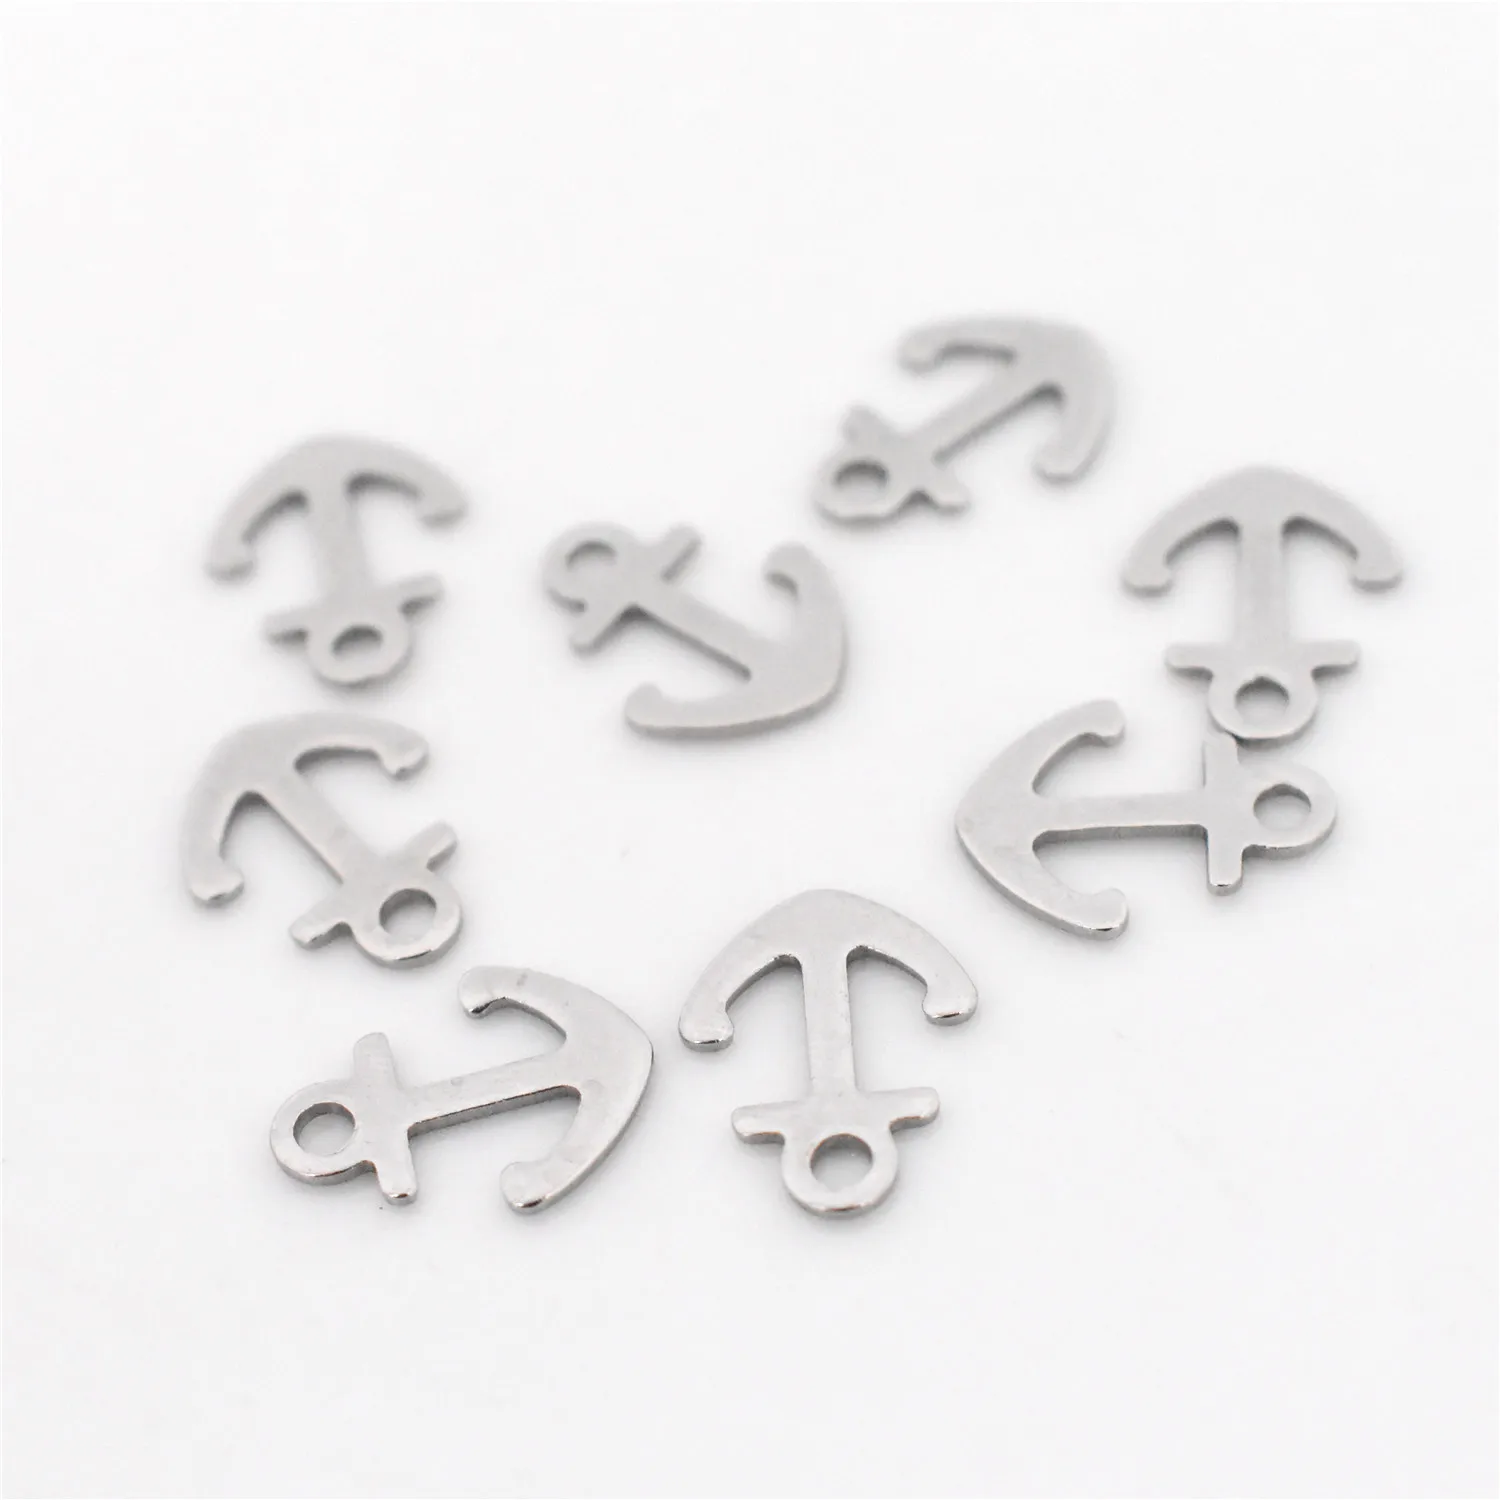 Фото 50pcs/lot 13.6x10.5mm Stainless Steel Material Anchor Charms Pendant DIY Handmade Necklace and Earring Jewelry Accessories | Украшения и